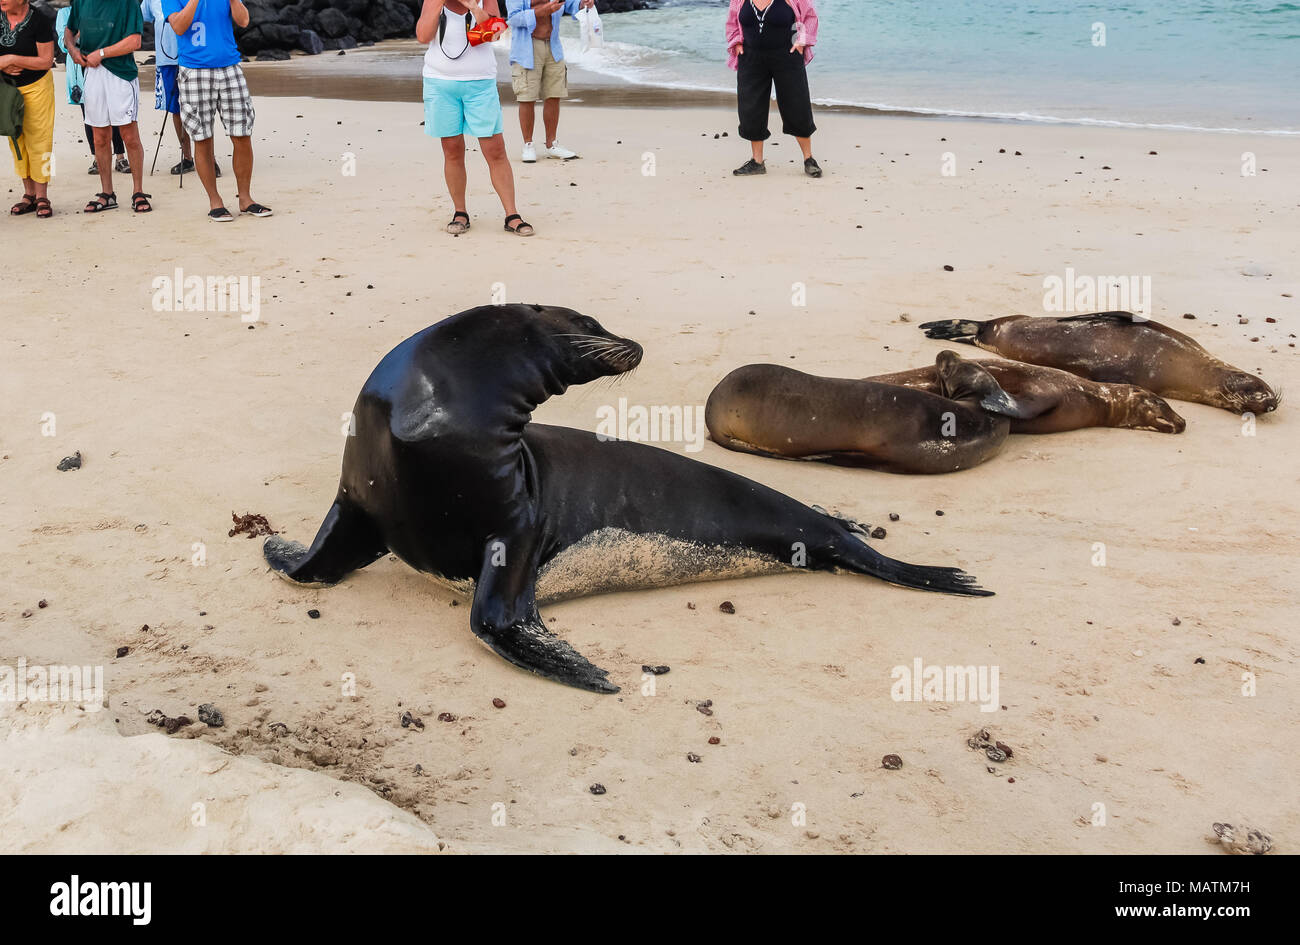 Group of unidentified tourists watching a group of sea lions on the beach of Galapagos Stock Photo